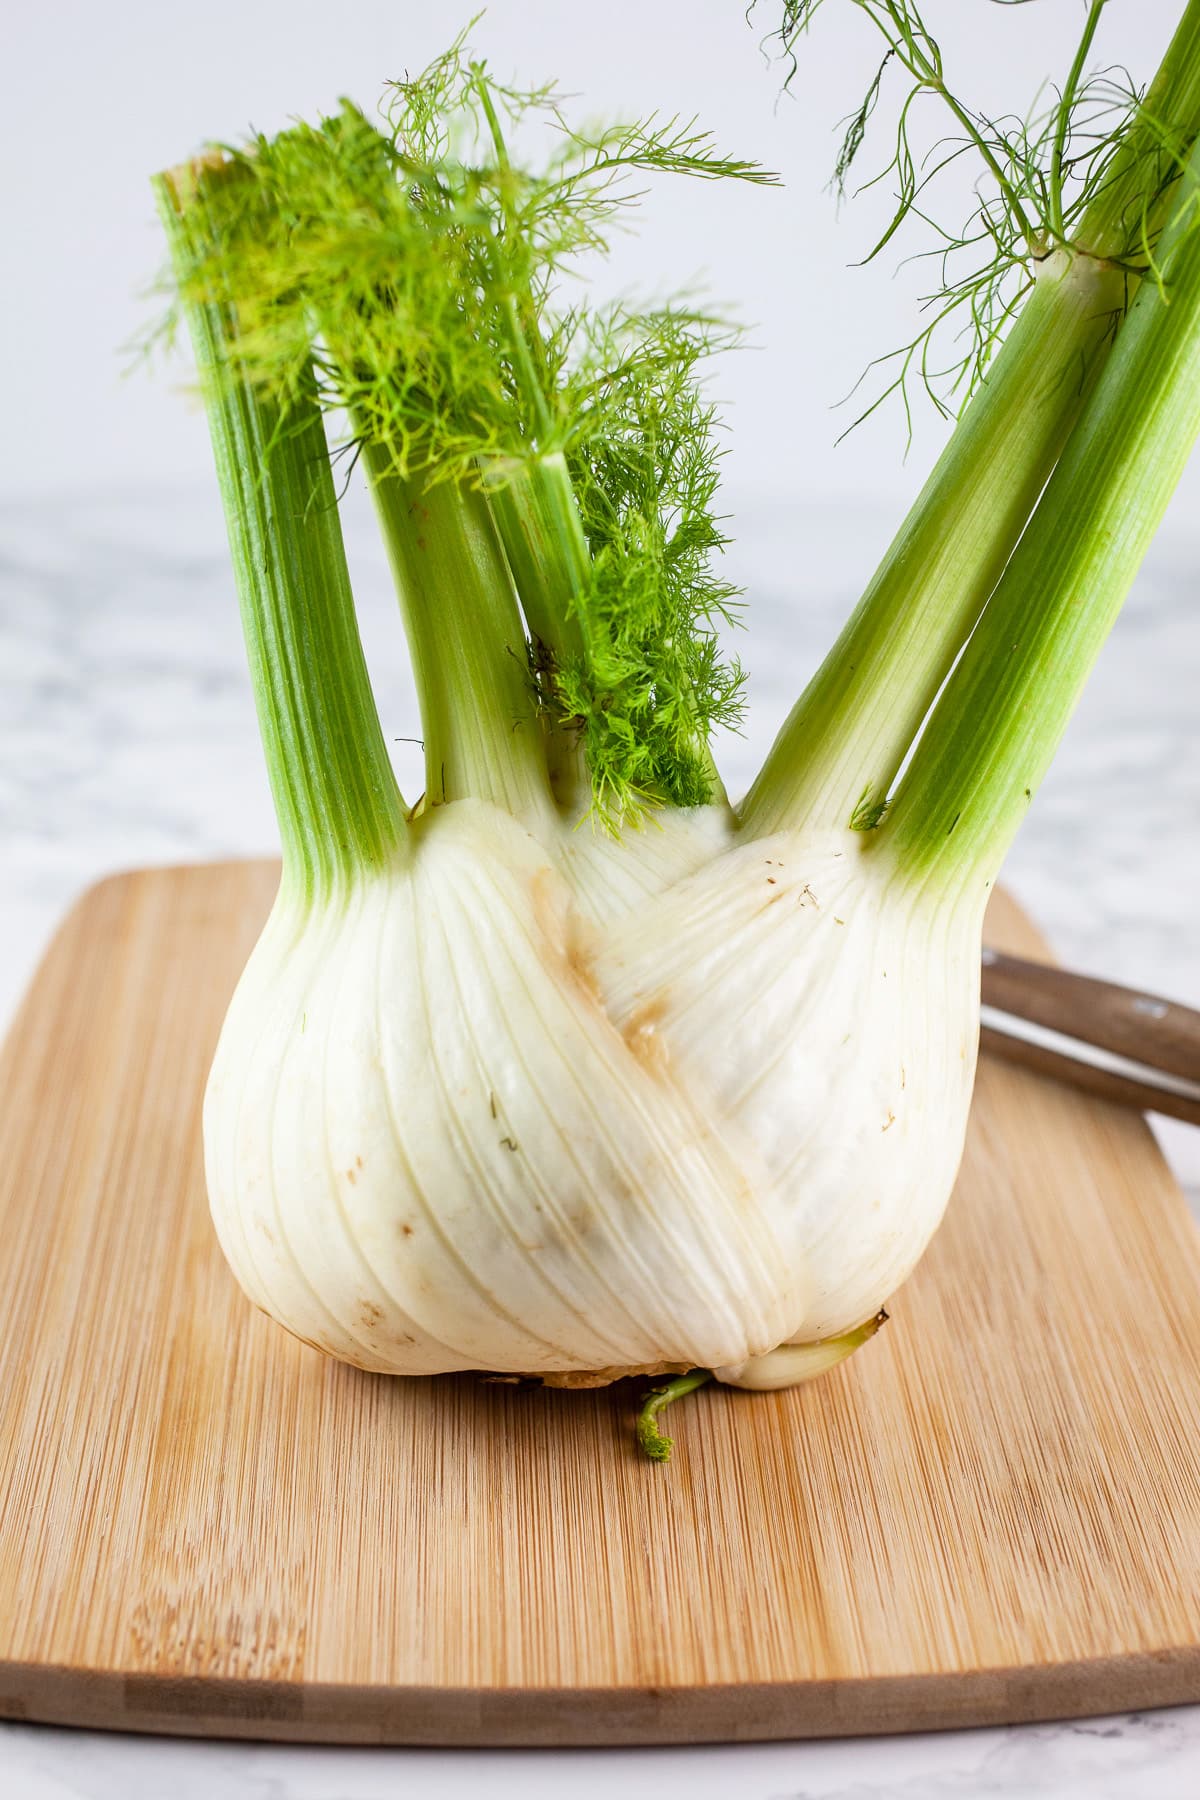 Whole fennel bulb on wooden cutting board with knife.